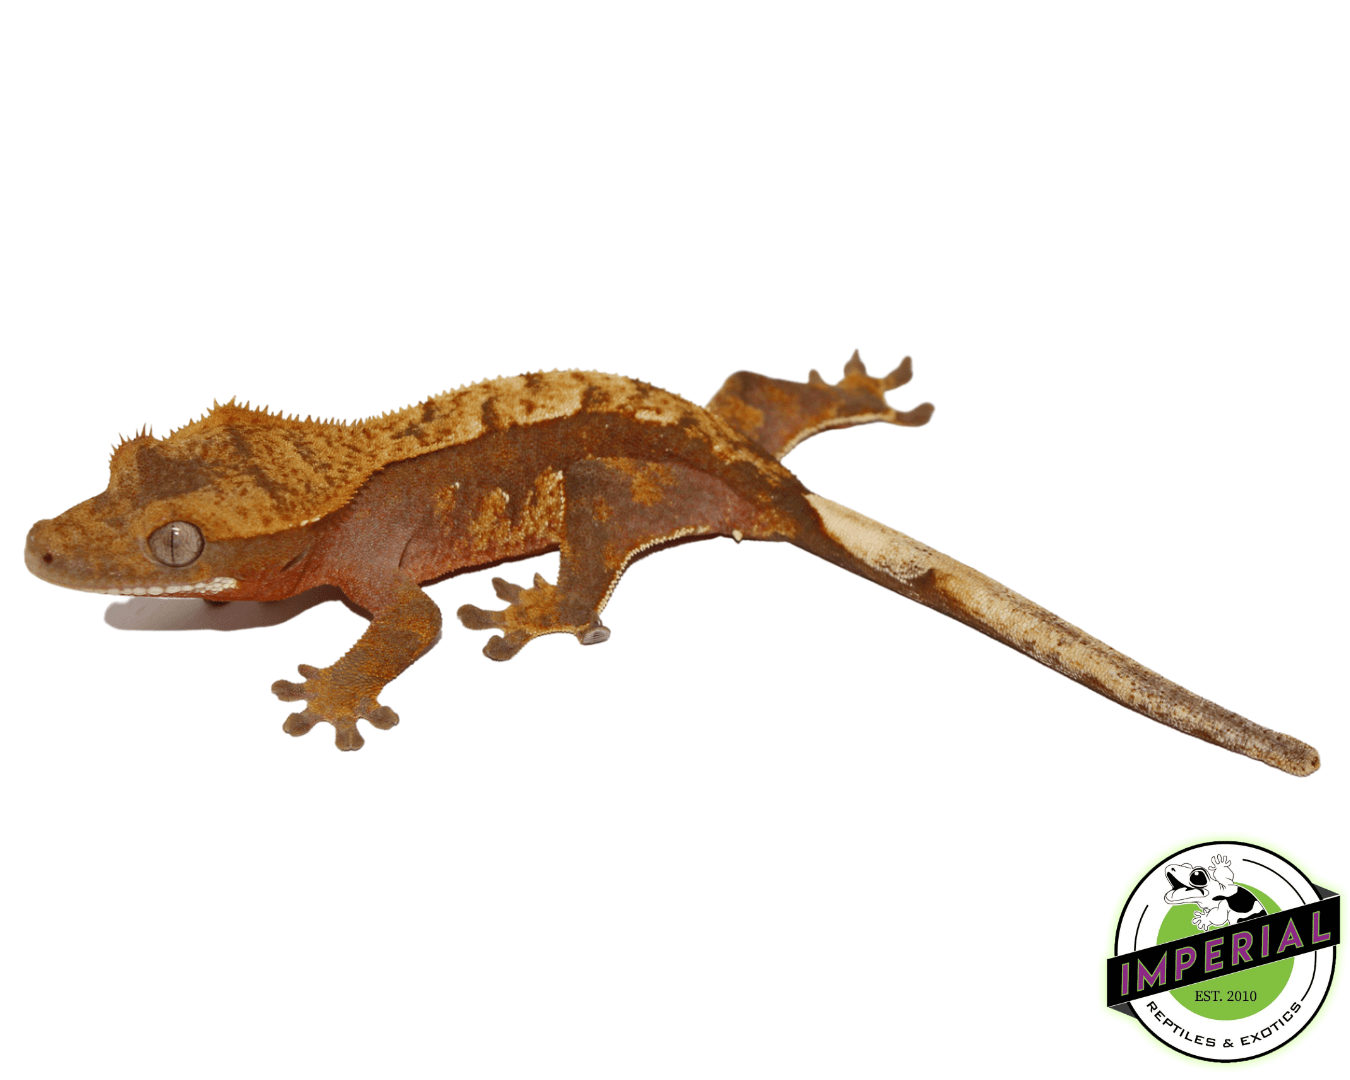 red harlequin crested gecko for sale online, buy crested geckos at cheap prices